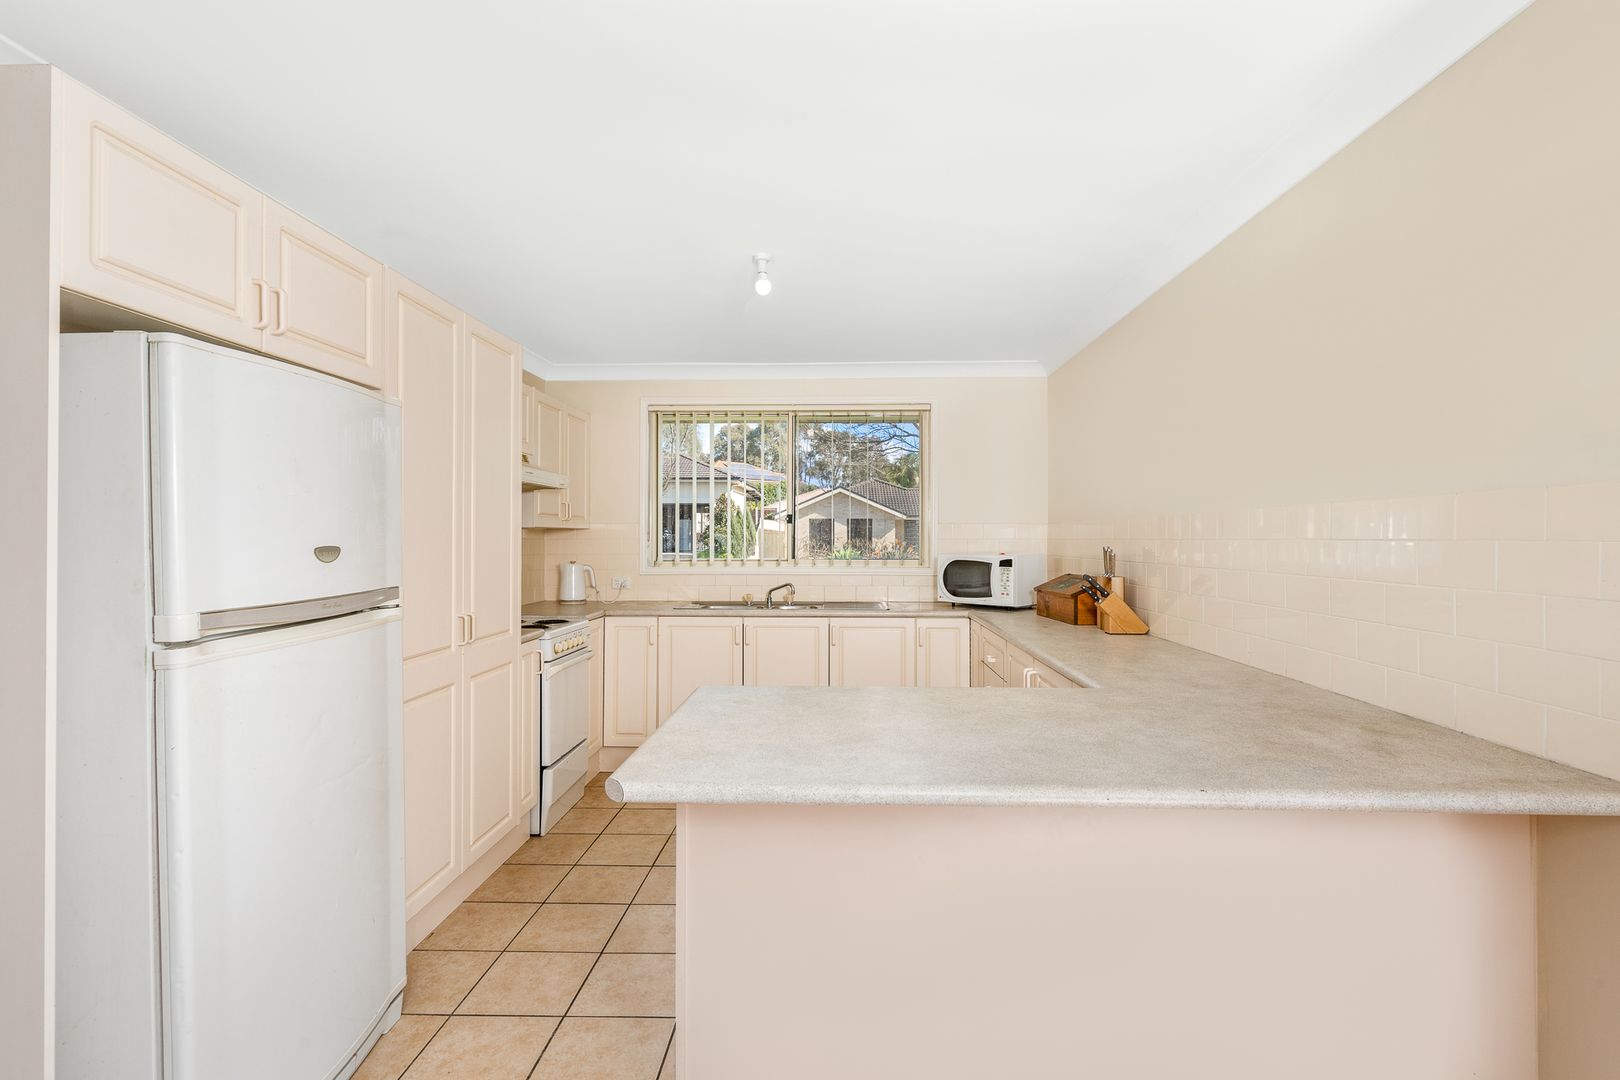 1A Ayrshire Place, Narellan Vale NSW 2567, Image 1